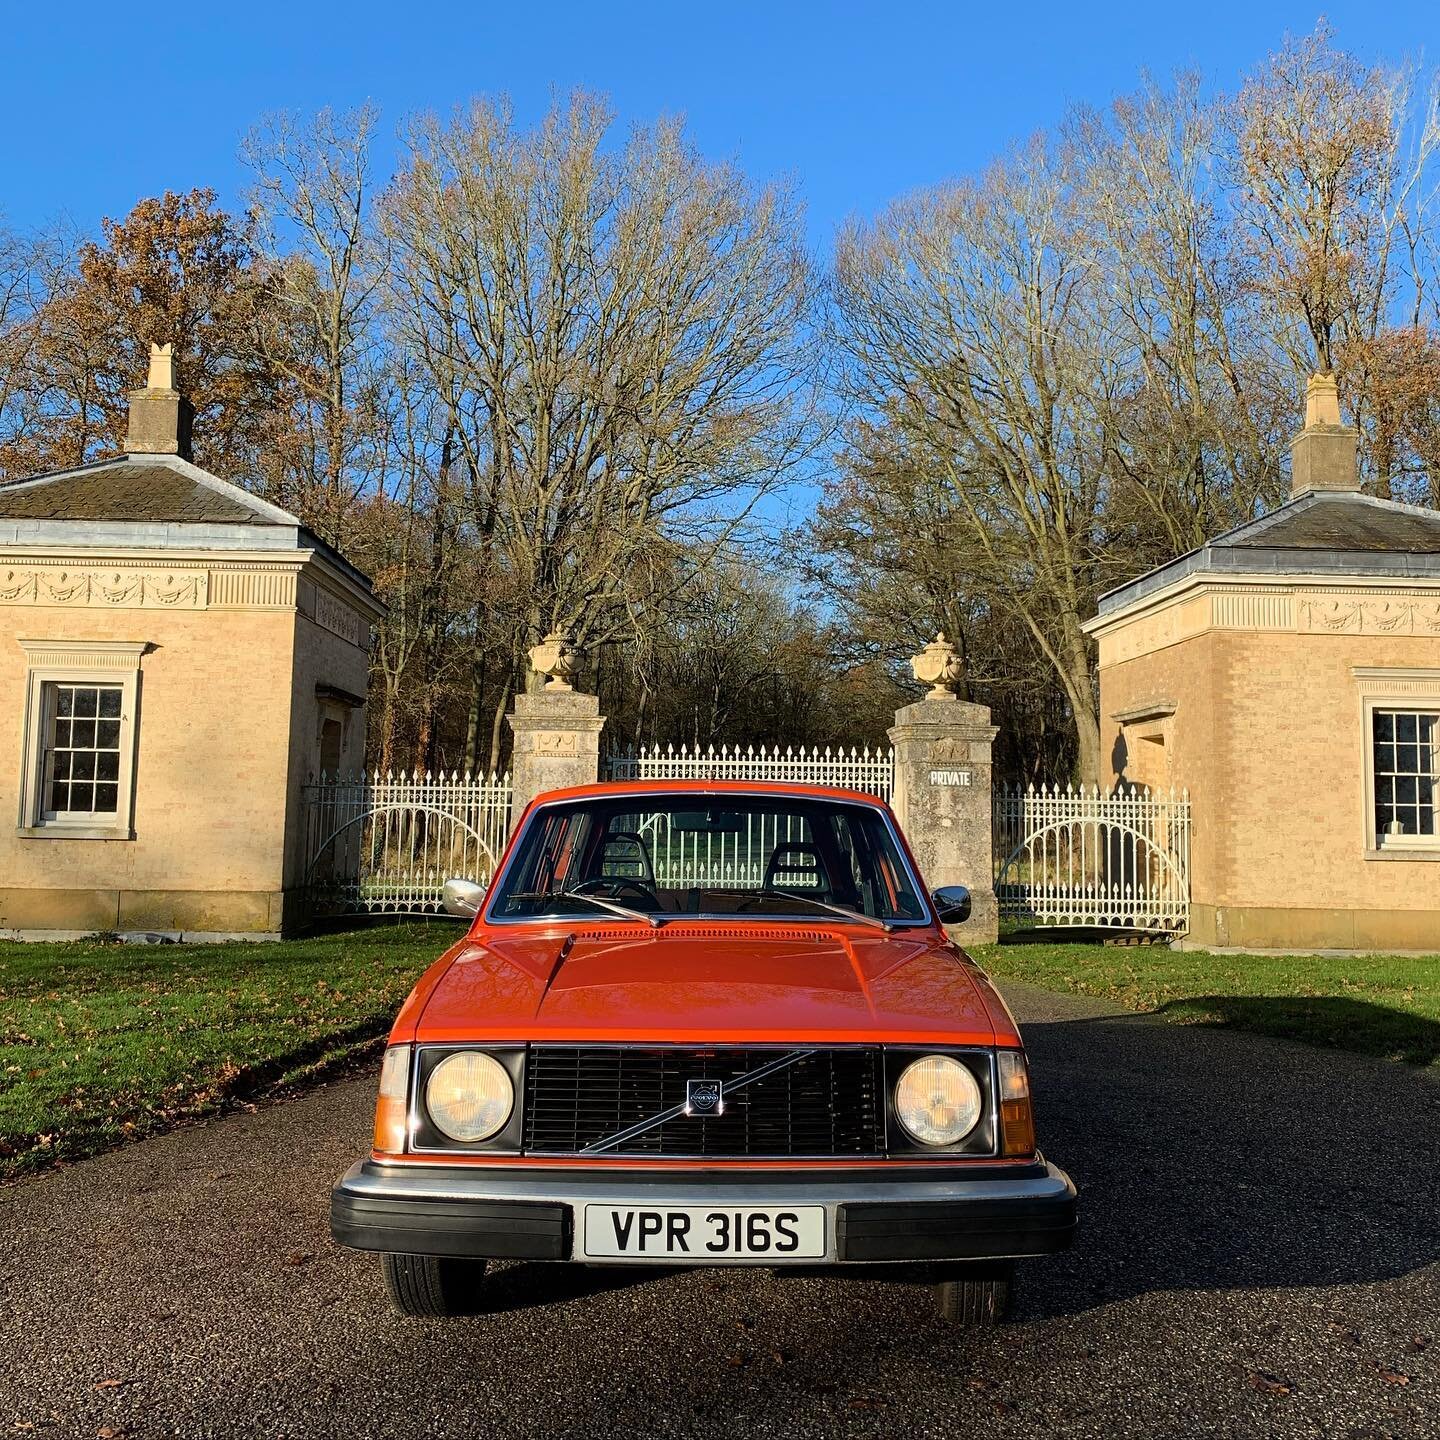 Karen, looking like a mean, lean, fighting machine. 

#alliwantforchristmasisyou #classiccars #volvo #volvoestate #carandvintage #classiccar #statelyhome #property #propertymanagement #suffolk #suffolkcounty #suffolkspots